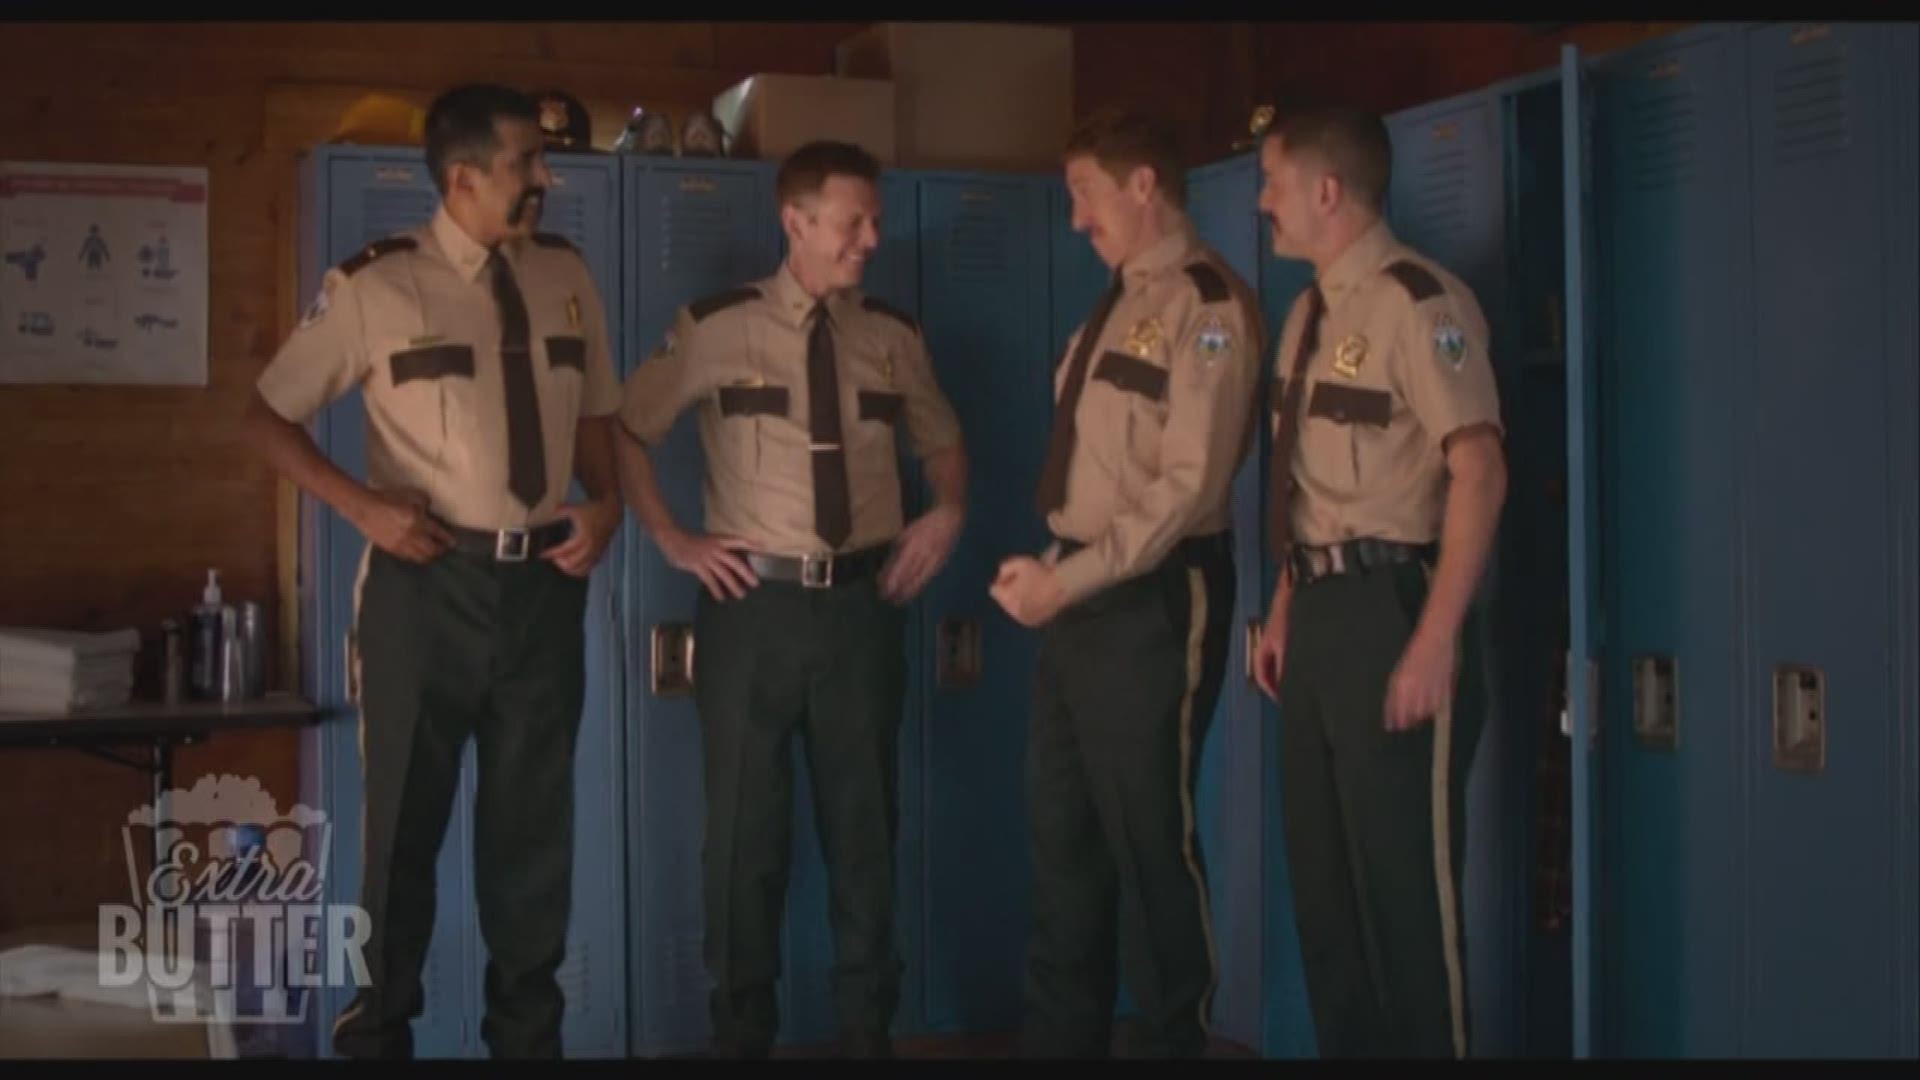 The original cast of Super Troopers is back for round two, nearly two decades later.